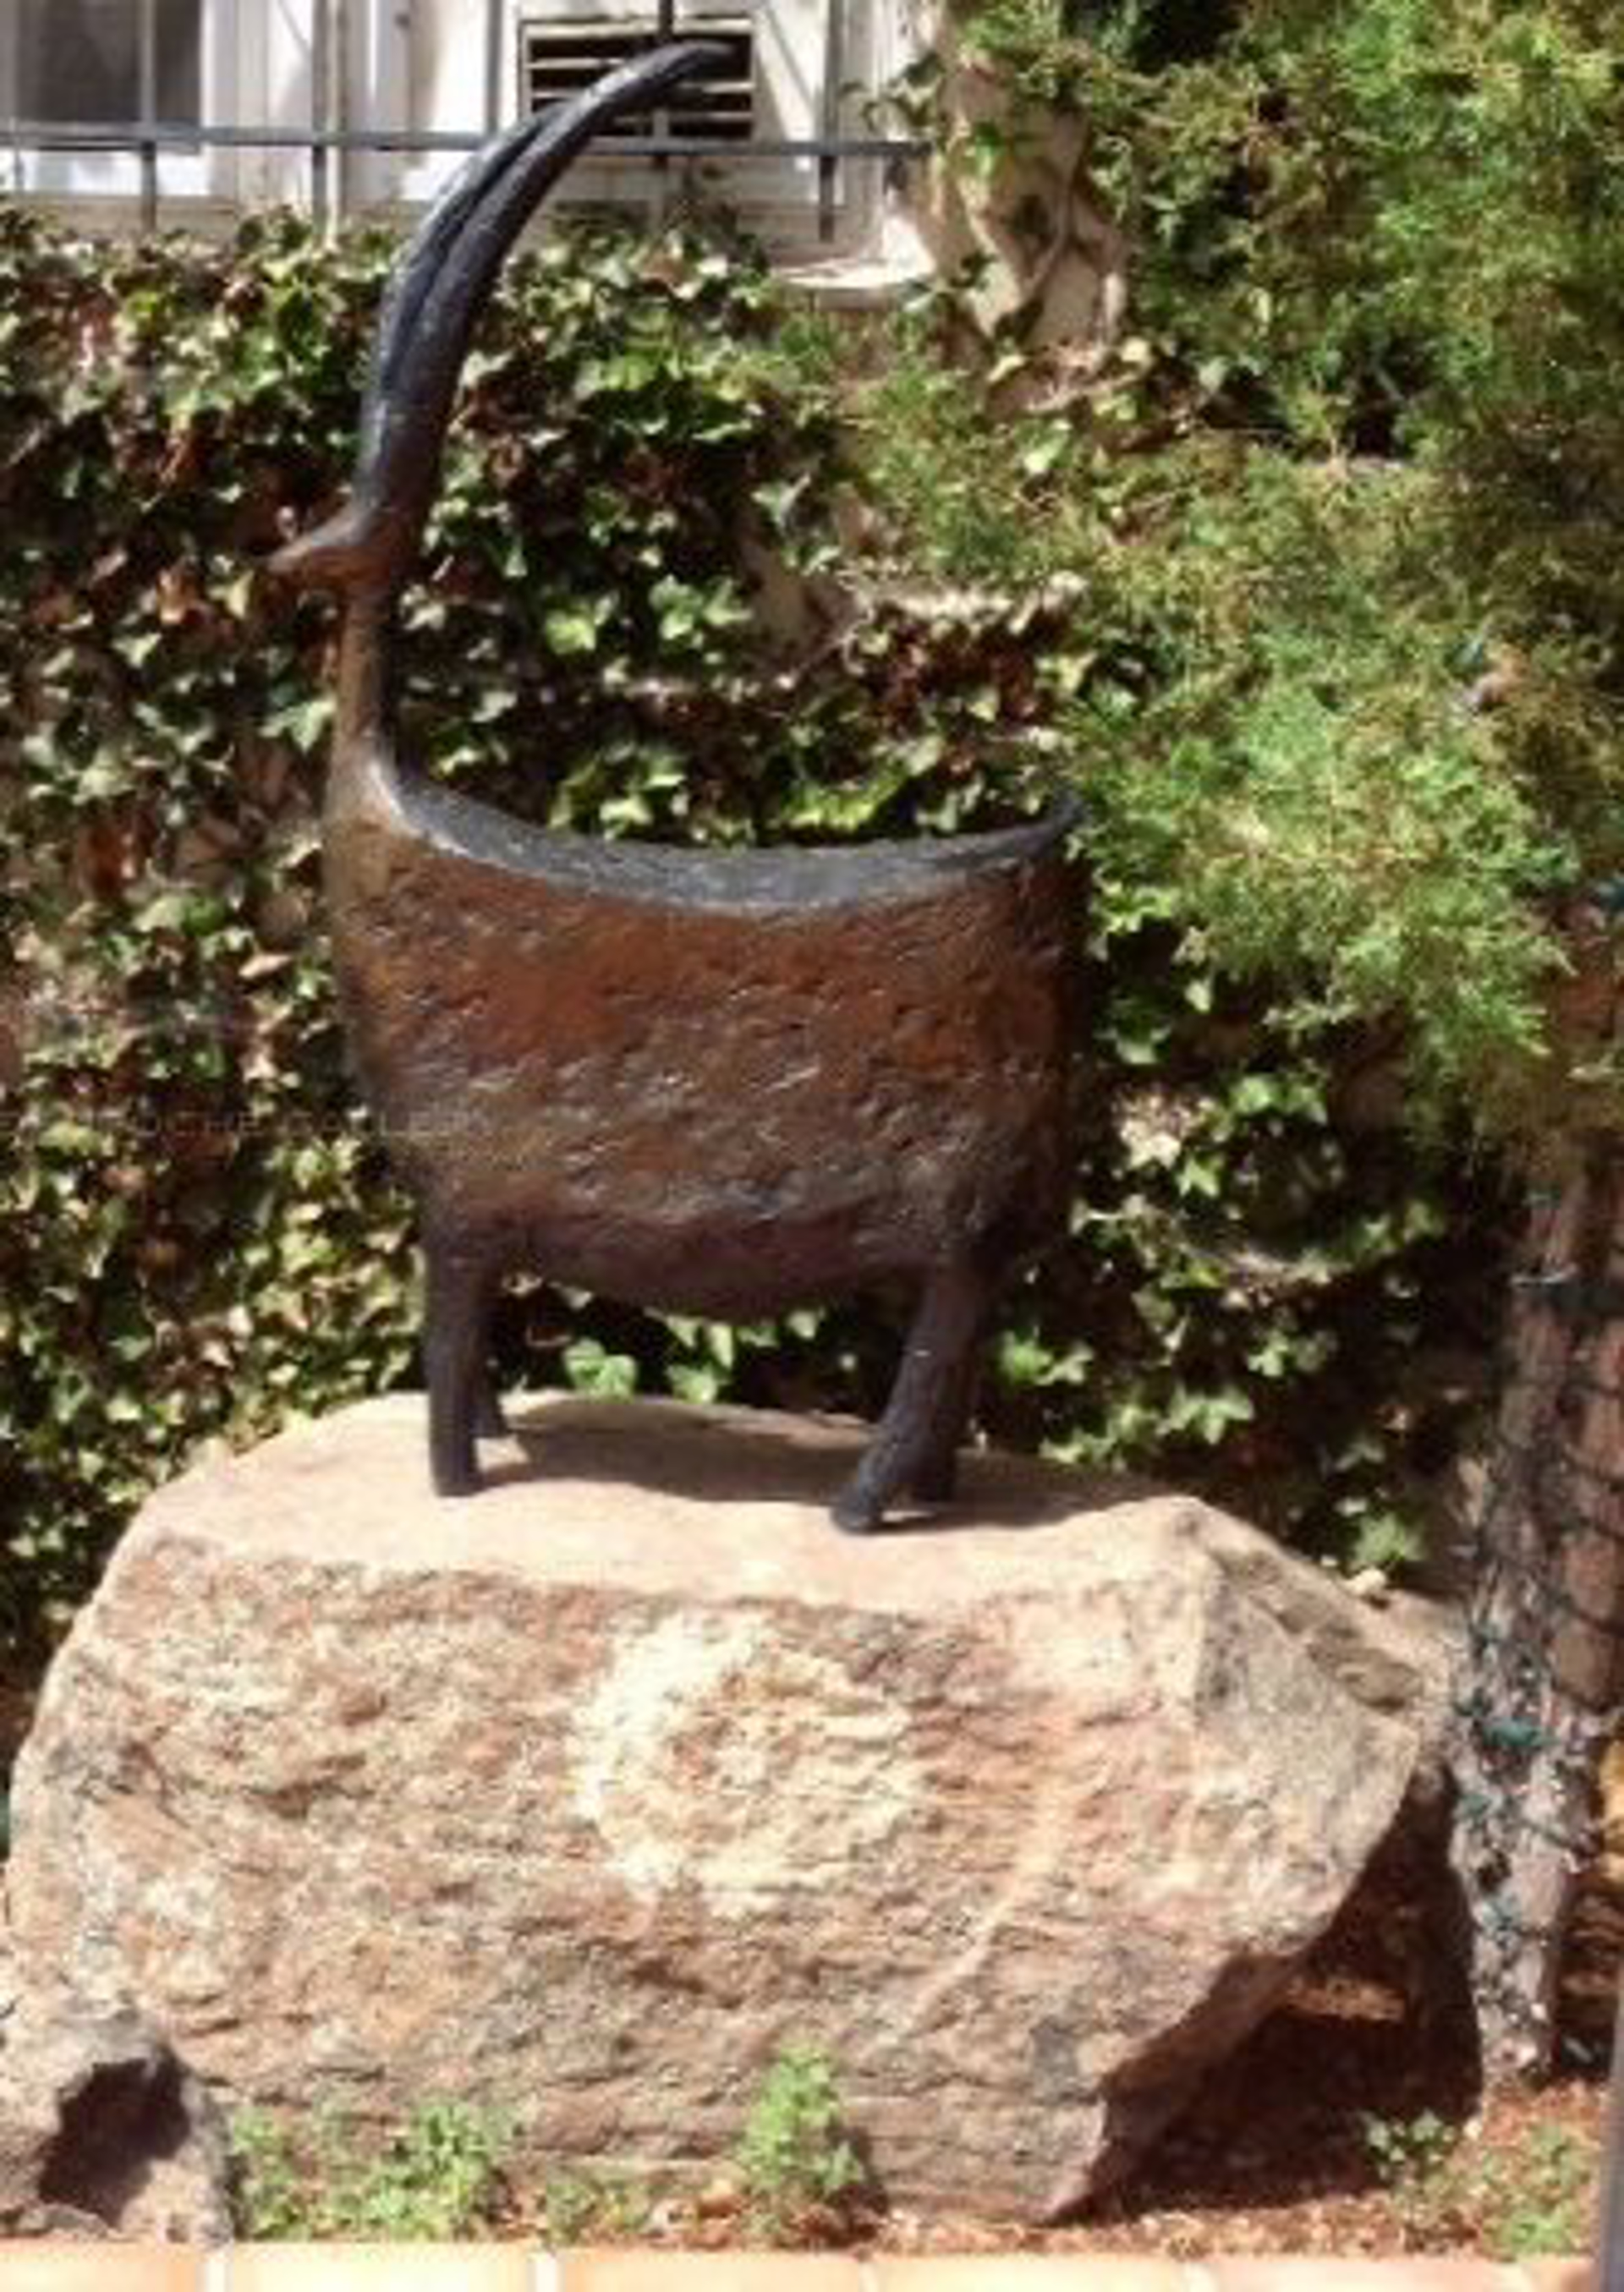 BIG  LISTENER - Bronze Sculpture $13,000 (45"x25"x10) Rock pedestal $1250 (18"x45"x18") May be purchased separately or together for a total of $14,250 by Jill Shwaiko